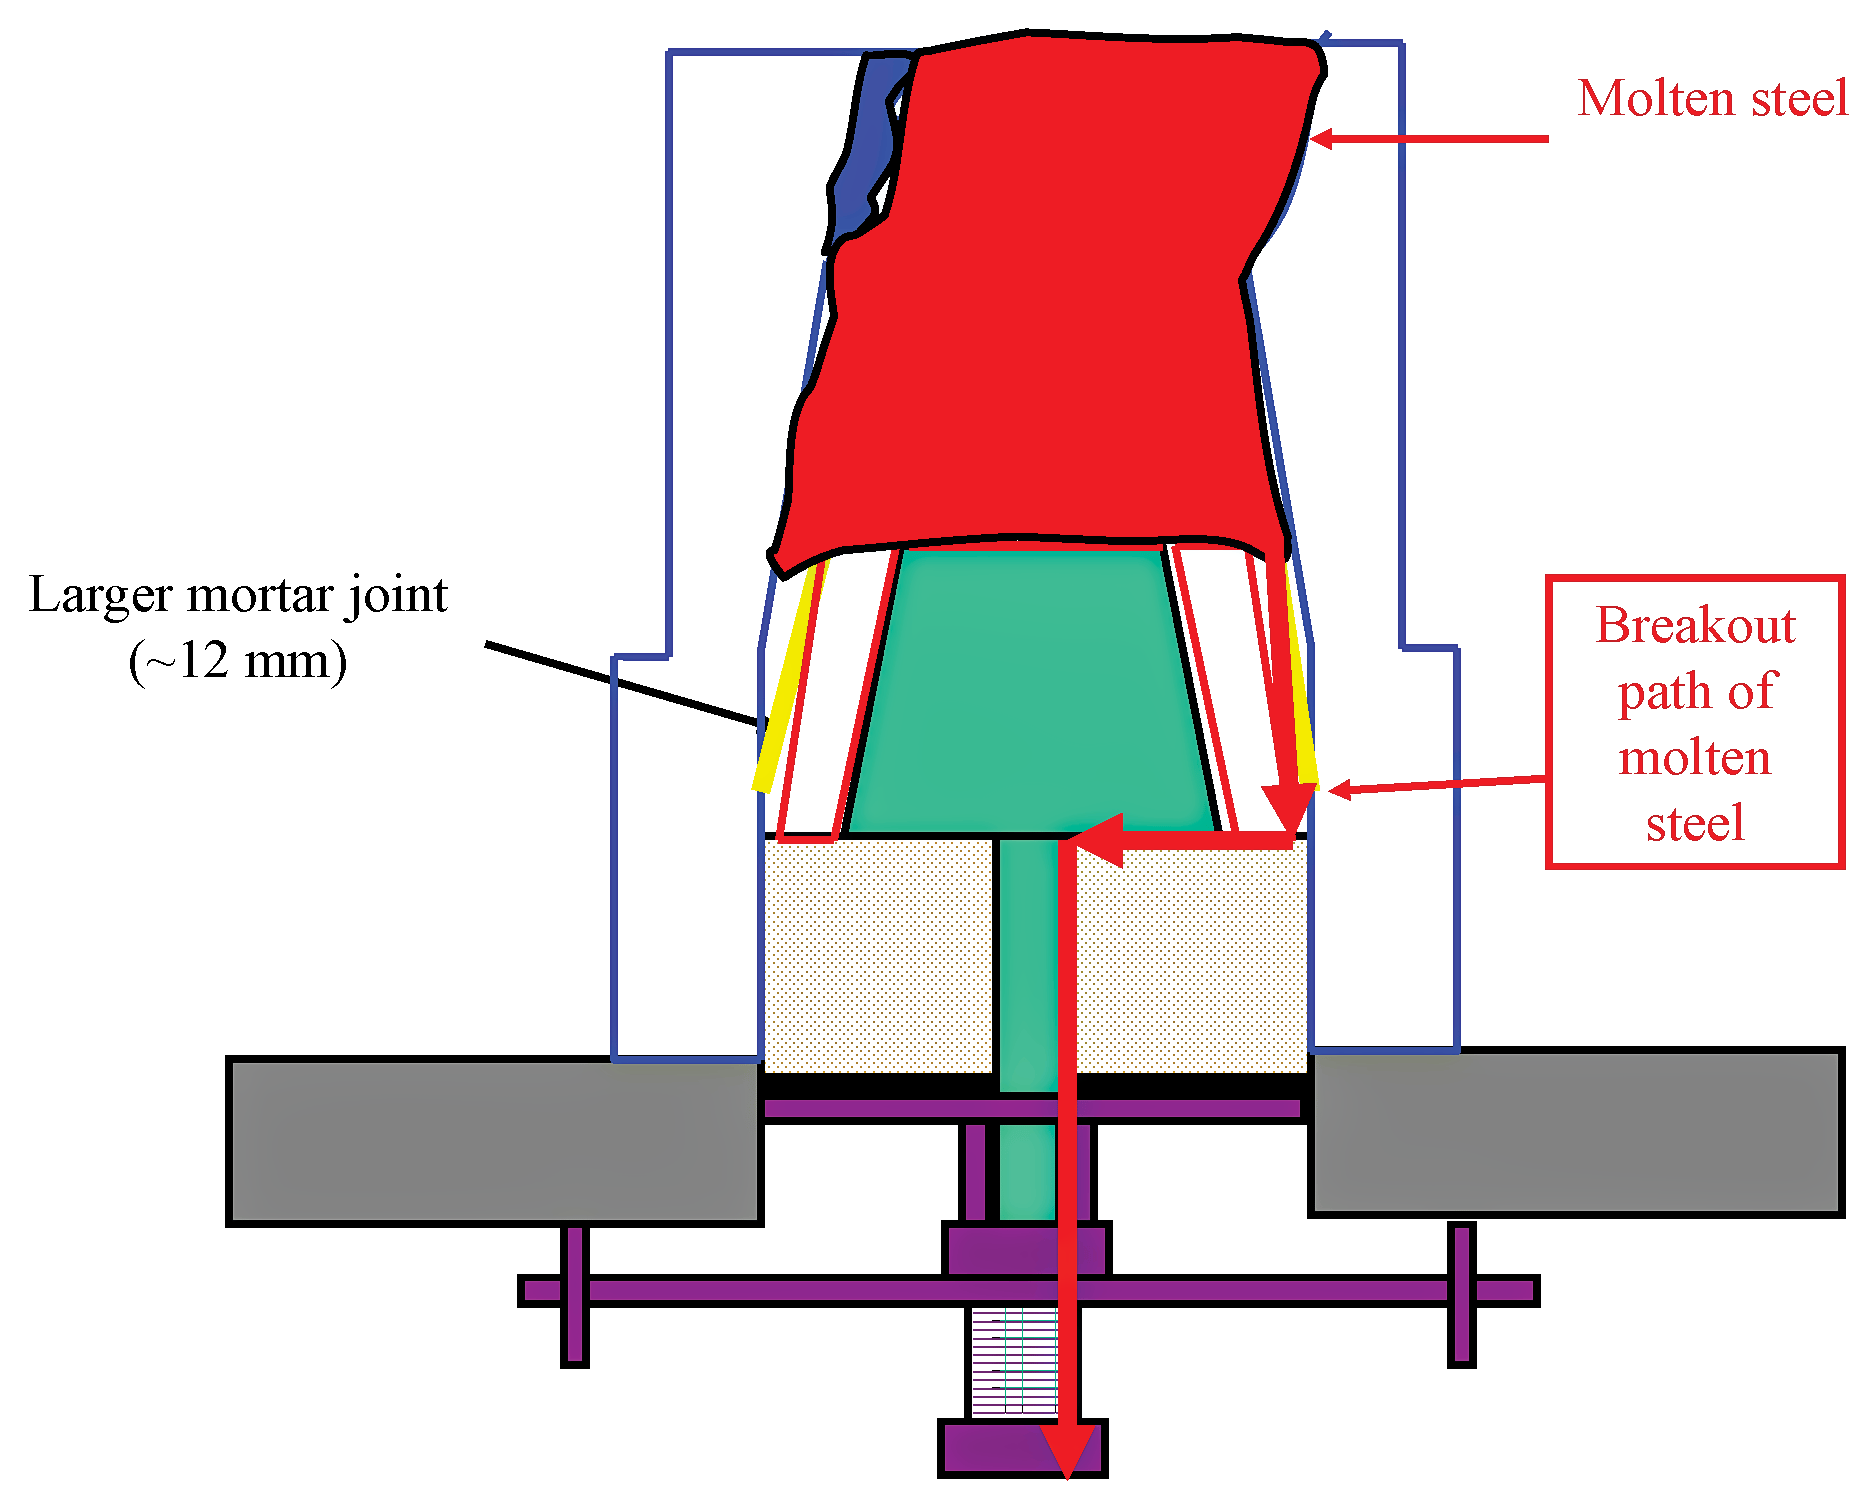 Illustration showing one pathway that molten steel can take during a breakout event